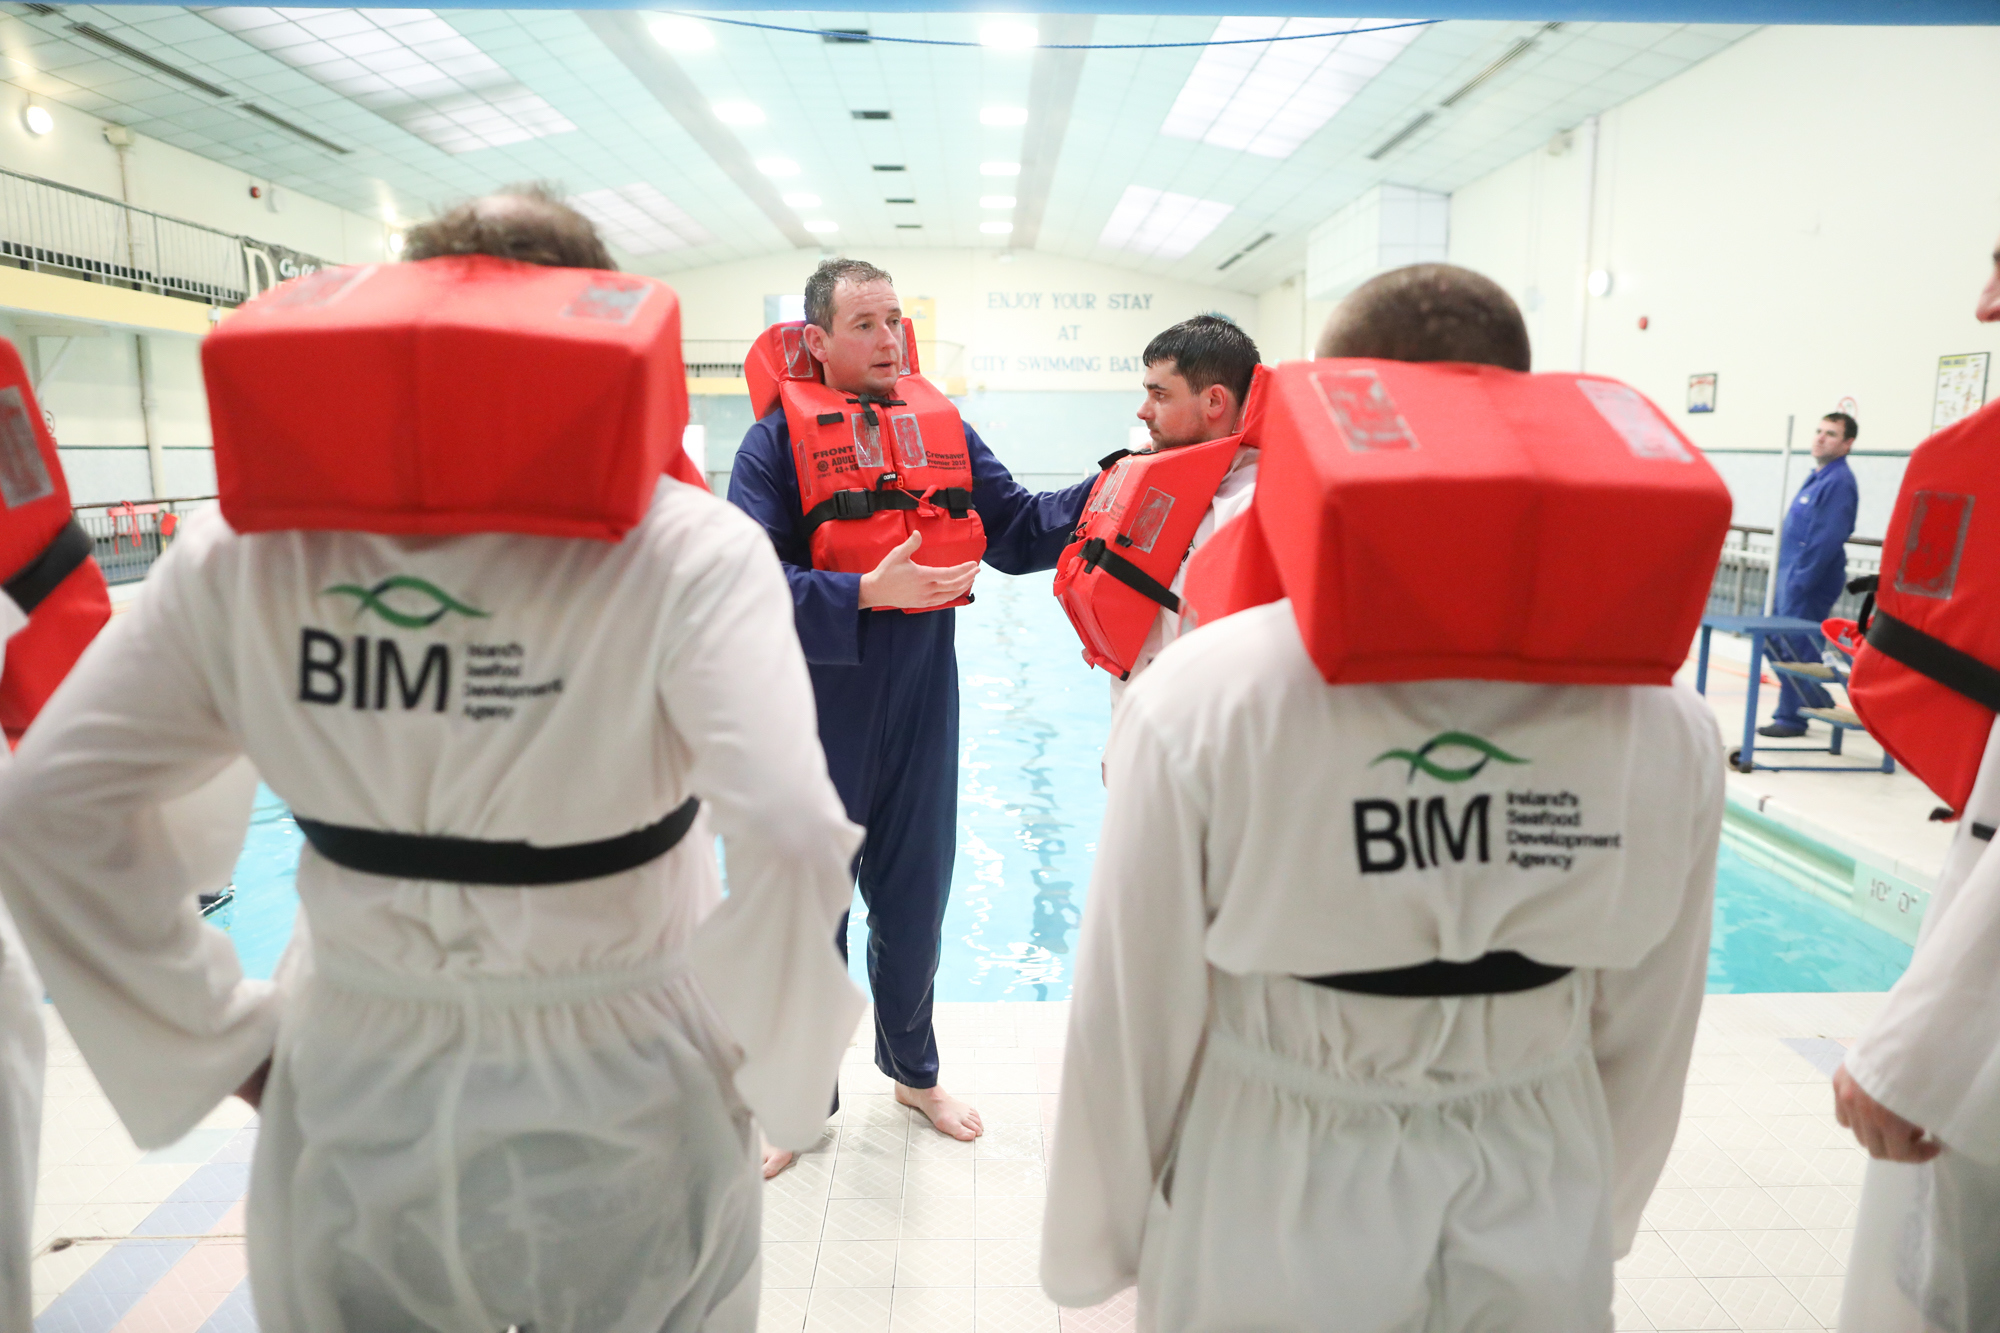 BIM and RNLI to give Man Overboard demonstration at Irish Skipper Expo 2023